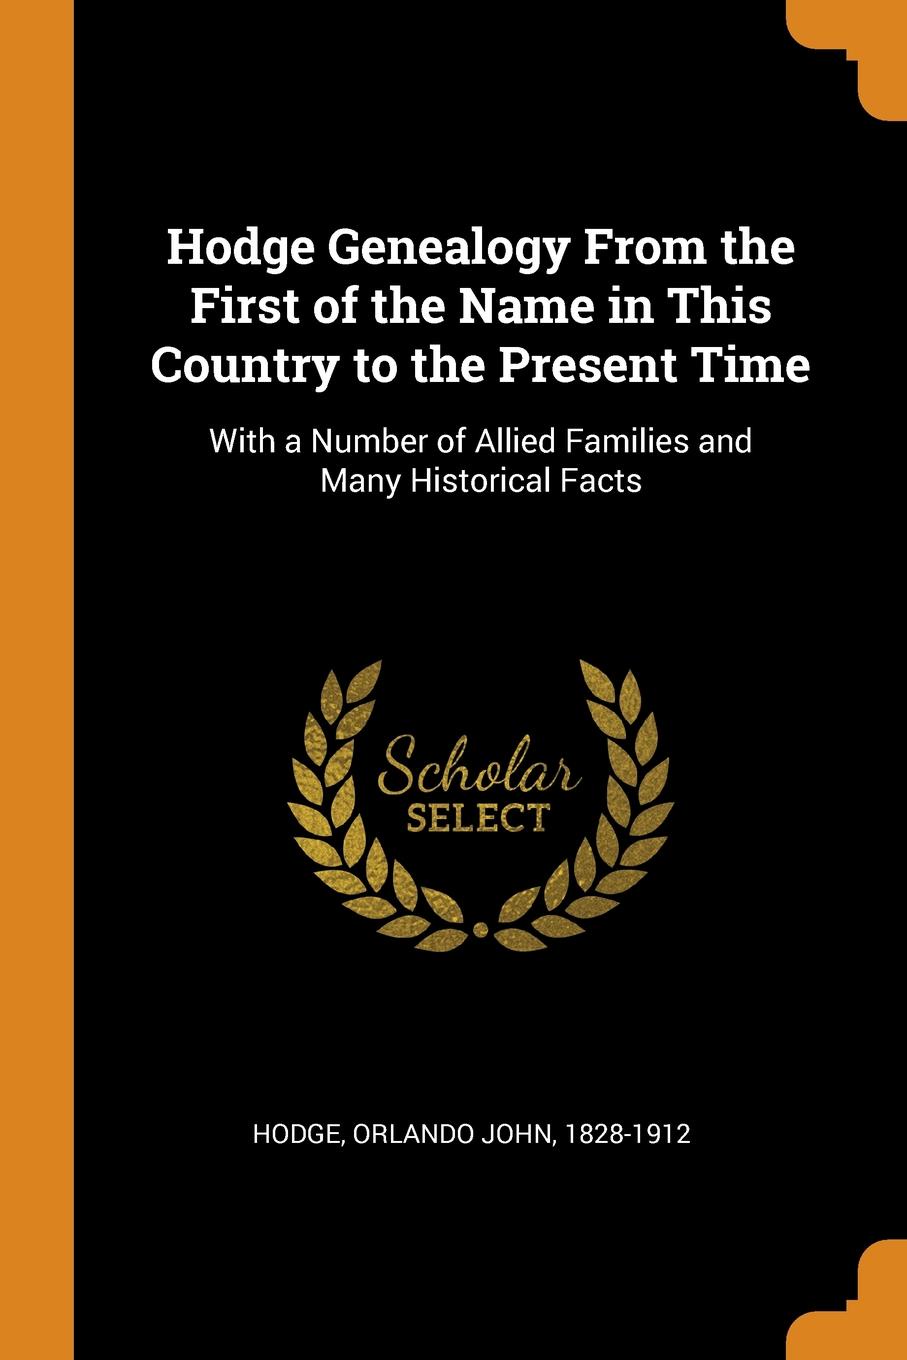 Hodge Genealogy From the First of the Name in This Country to the Present Time. With a Number of Allied Families and Many Historical Facts